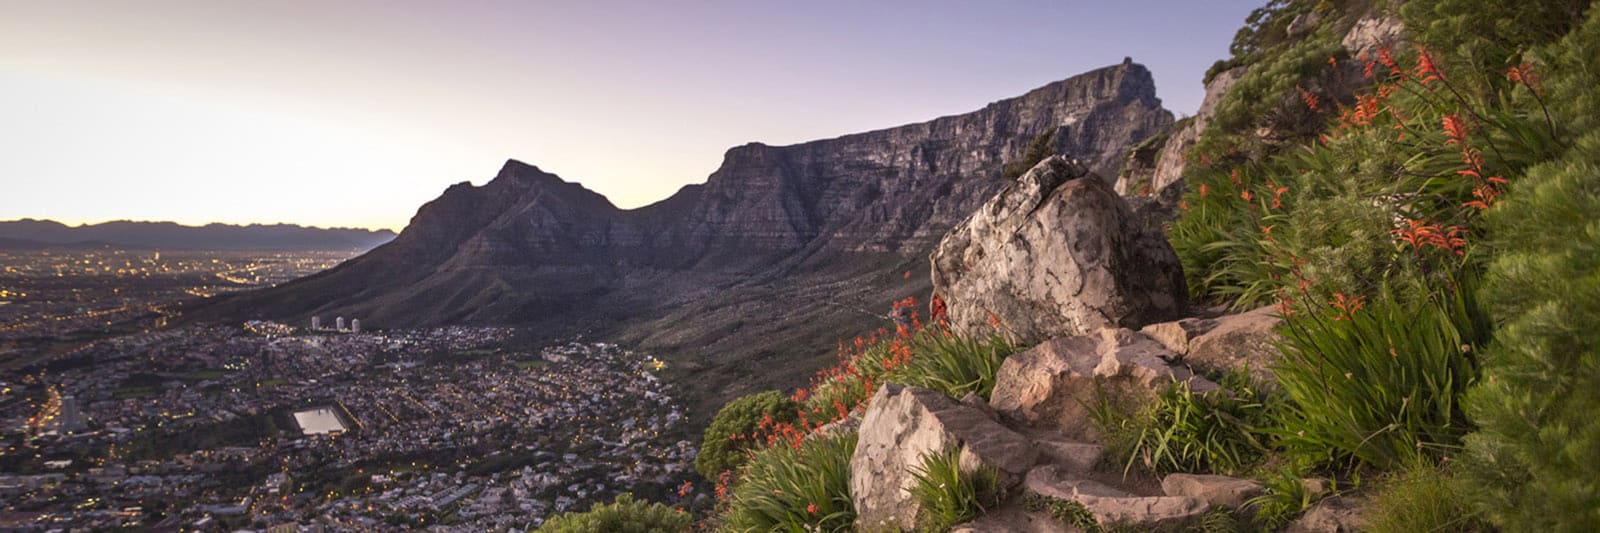 Cape Town Tour: 5 Reasons the Mother City Inspires Photography